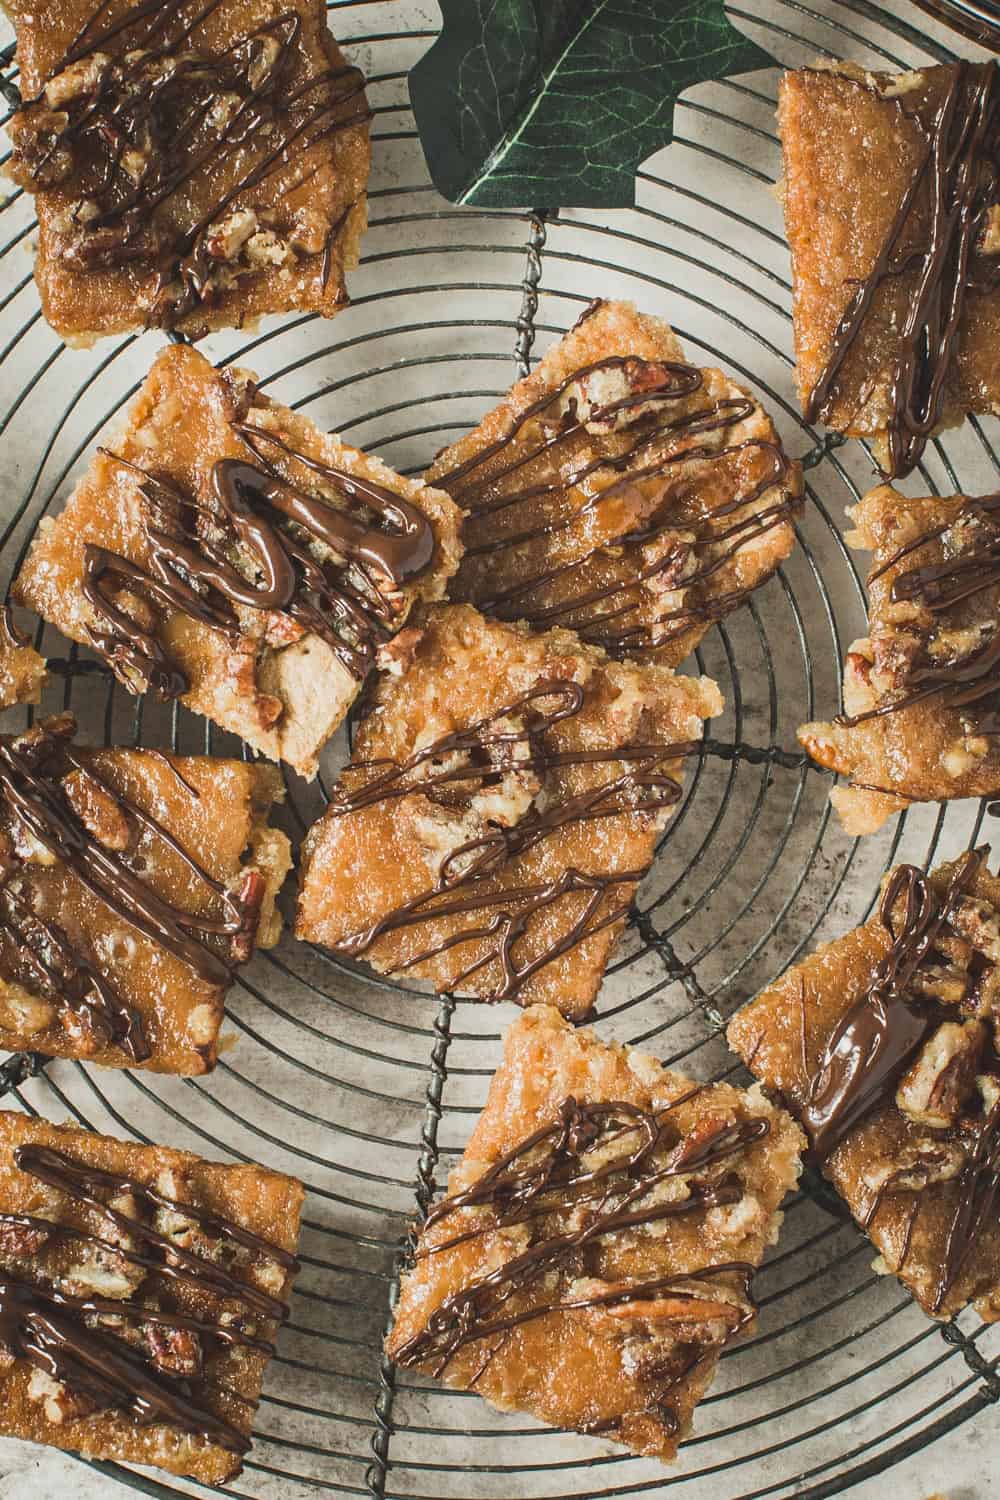 Praline bars drizzled in chocolate on a wire rack.